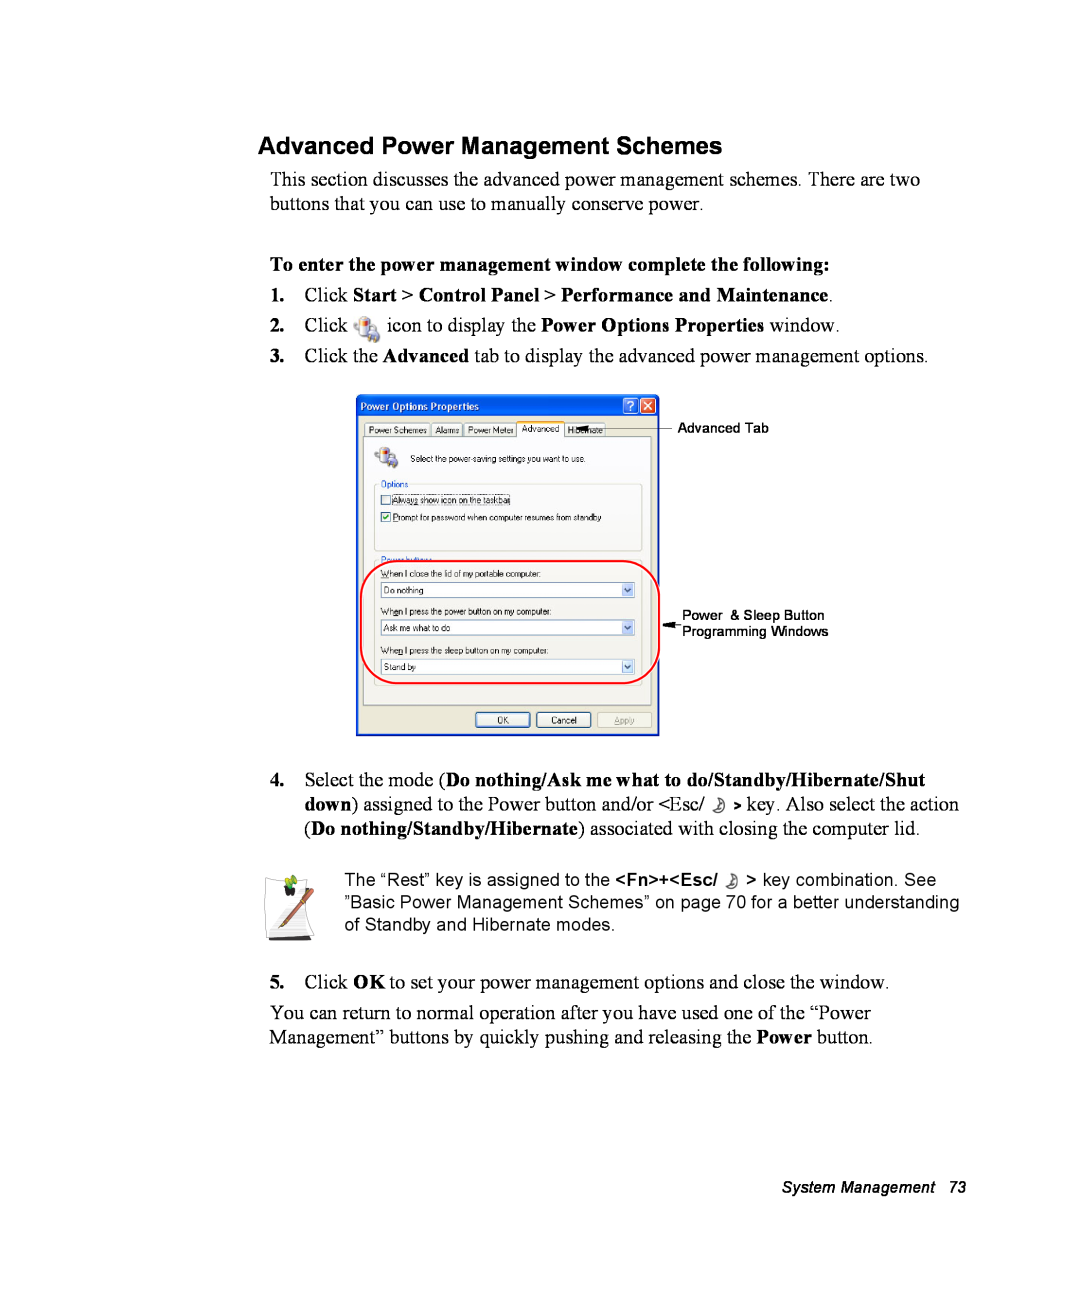 Samsung NM40PRDV03/SEF Advanced Power Management Schemes, To enter the power management window complete the following 